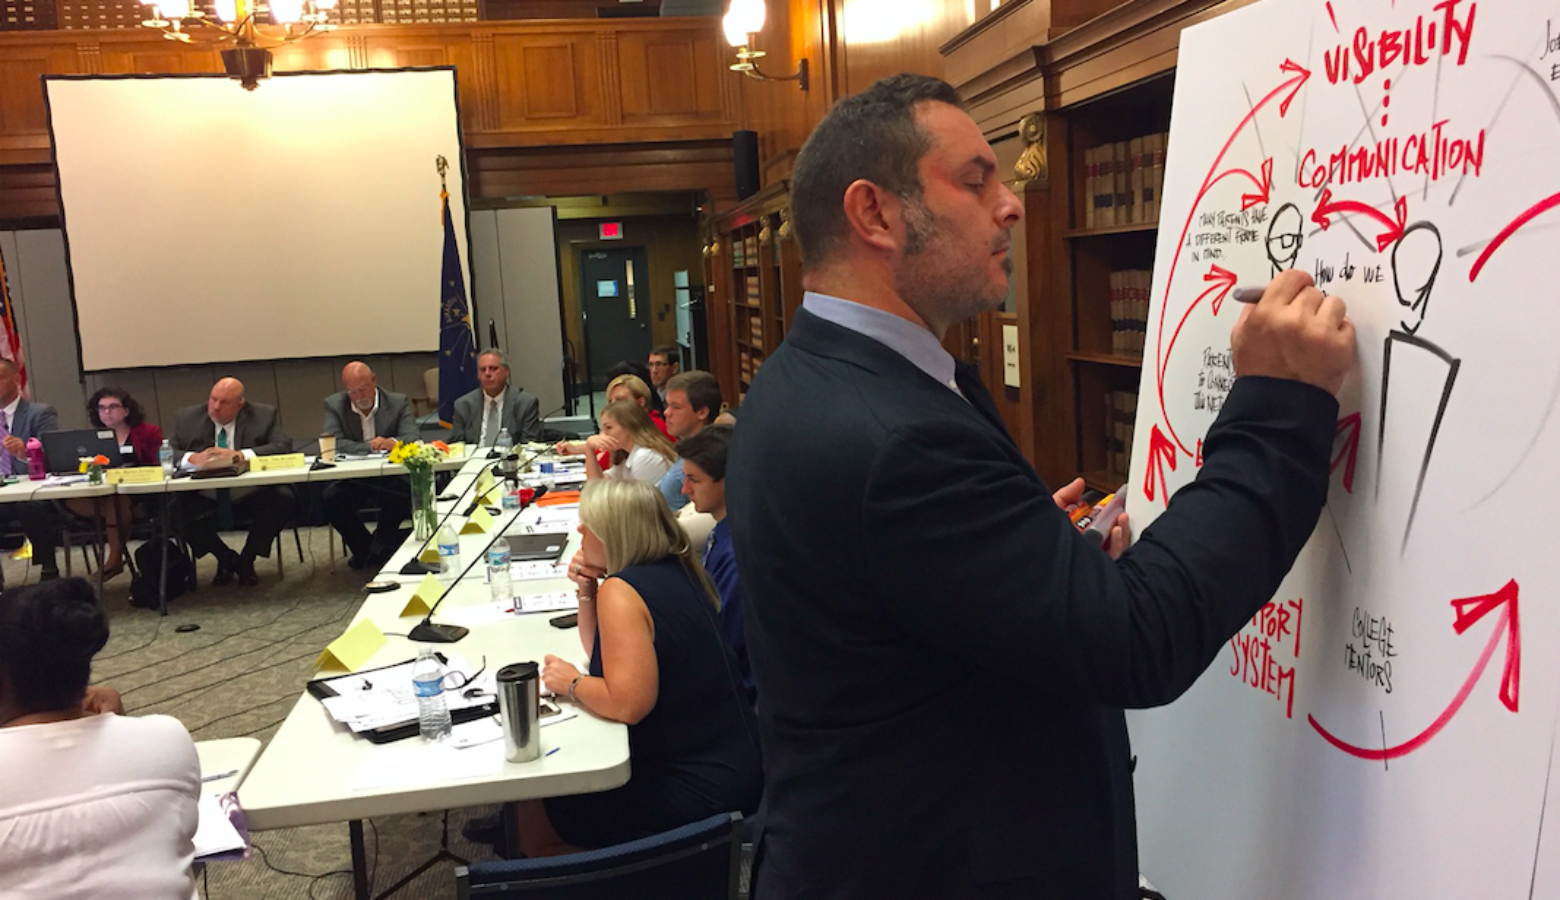 Mike Fleisch illustrates and takes notes on the discussion by the Graduation Pathways Committee members Aug. 23, 2017 at the Indiana State Library in Indianapolis. (Credit: Eric Weddle/WFYI Public Media)